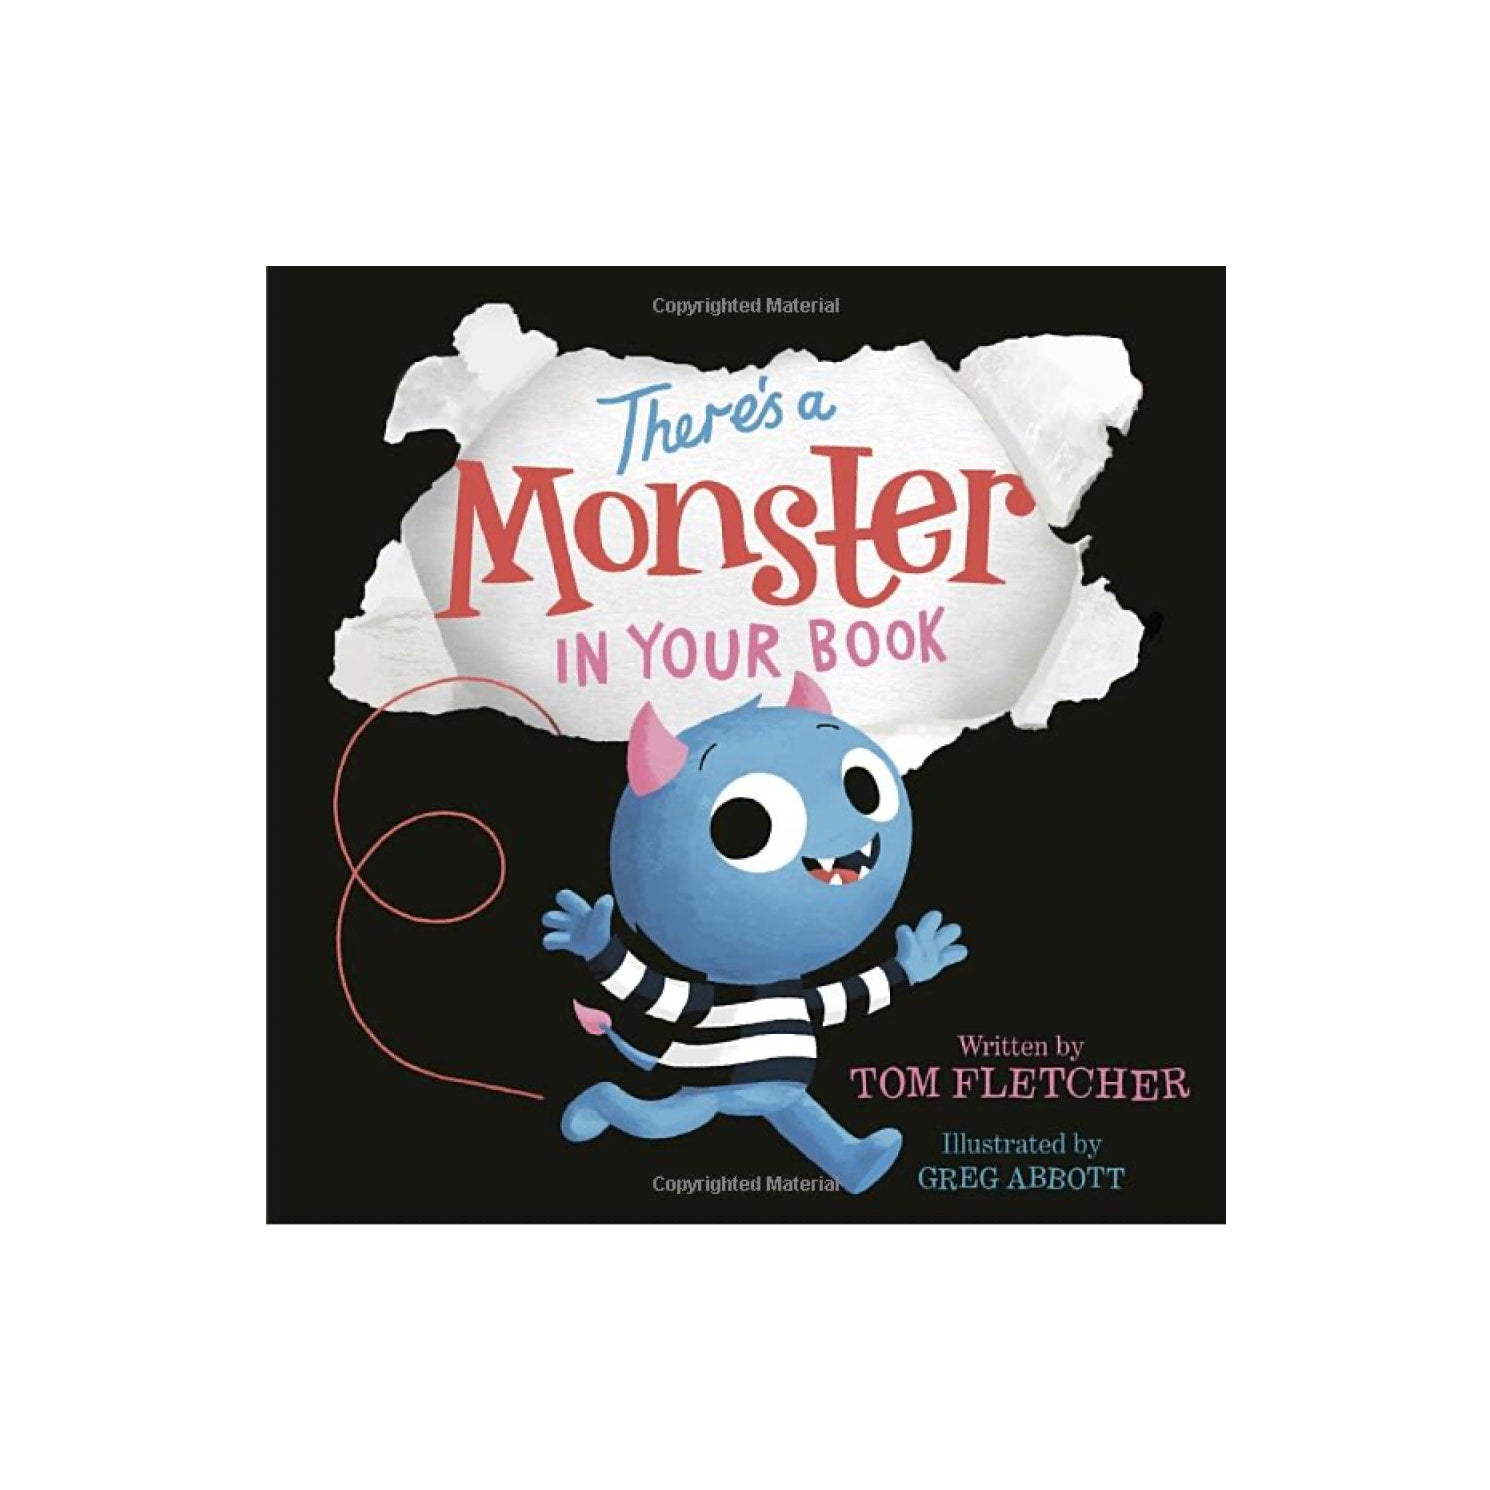 There's a Monster in Your Book (Who's in Your Book?)